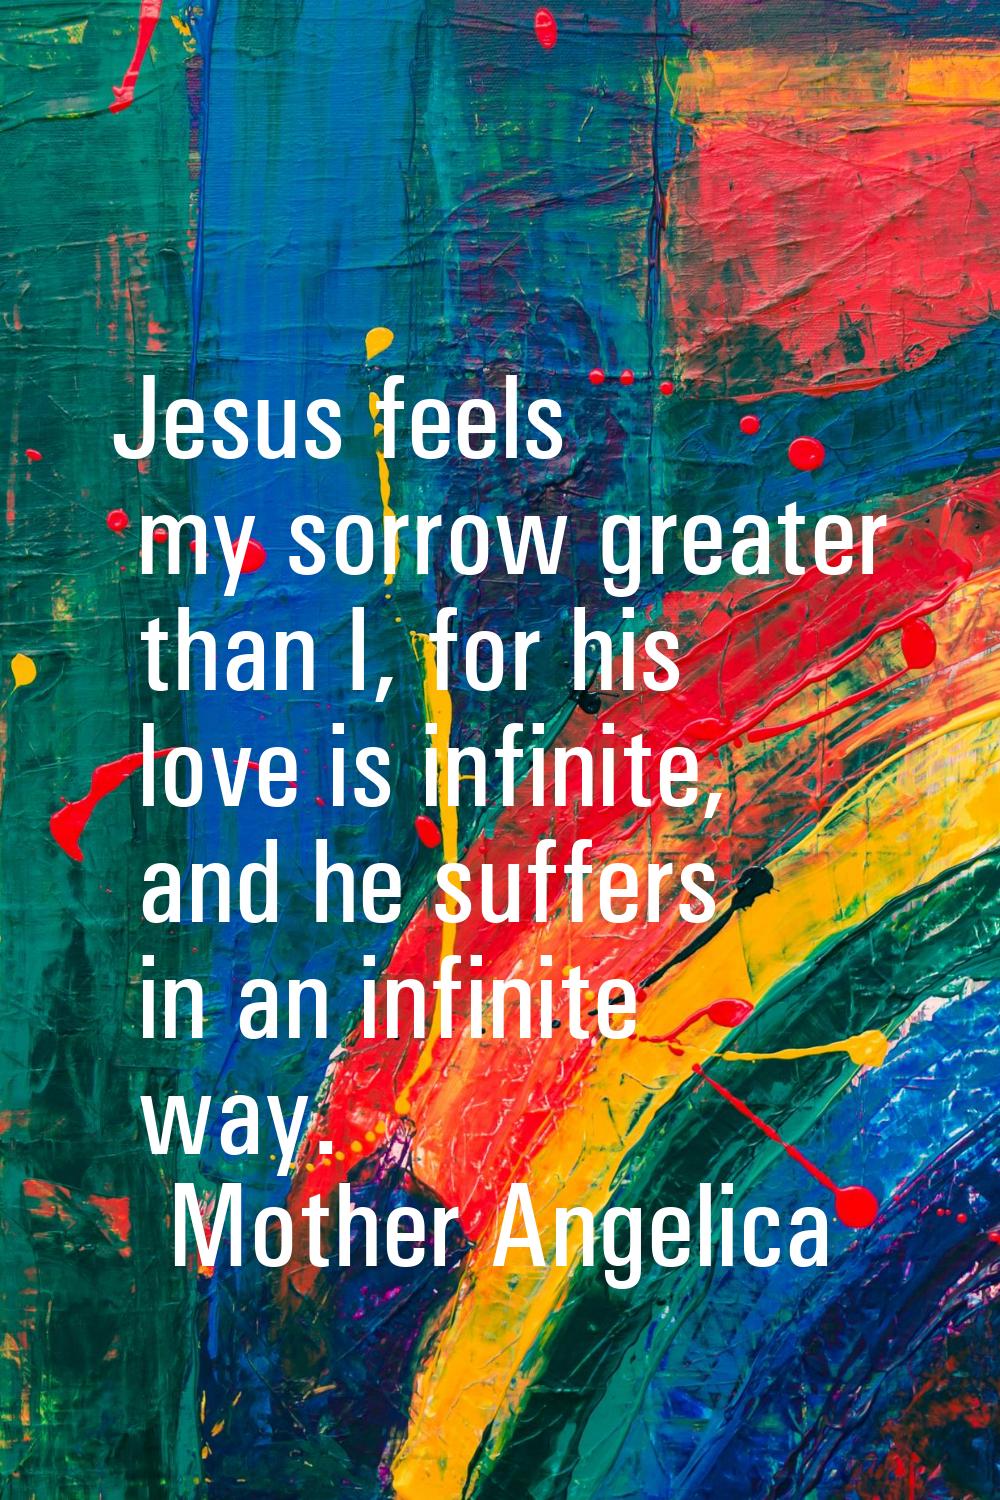 Jesus feels my sorrow greater than I, for his love is infinite, and he suffers in an infinite way.